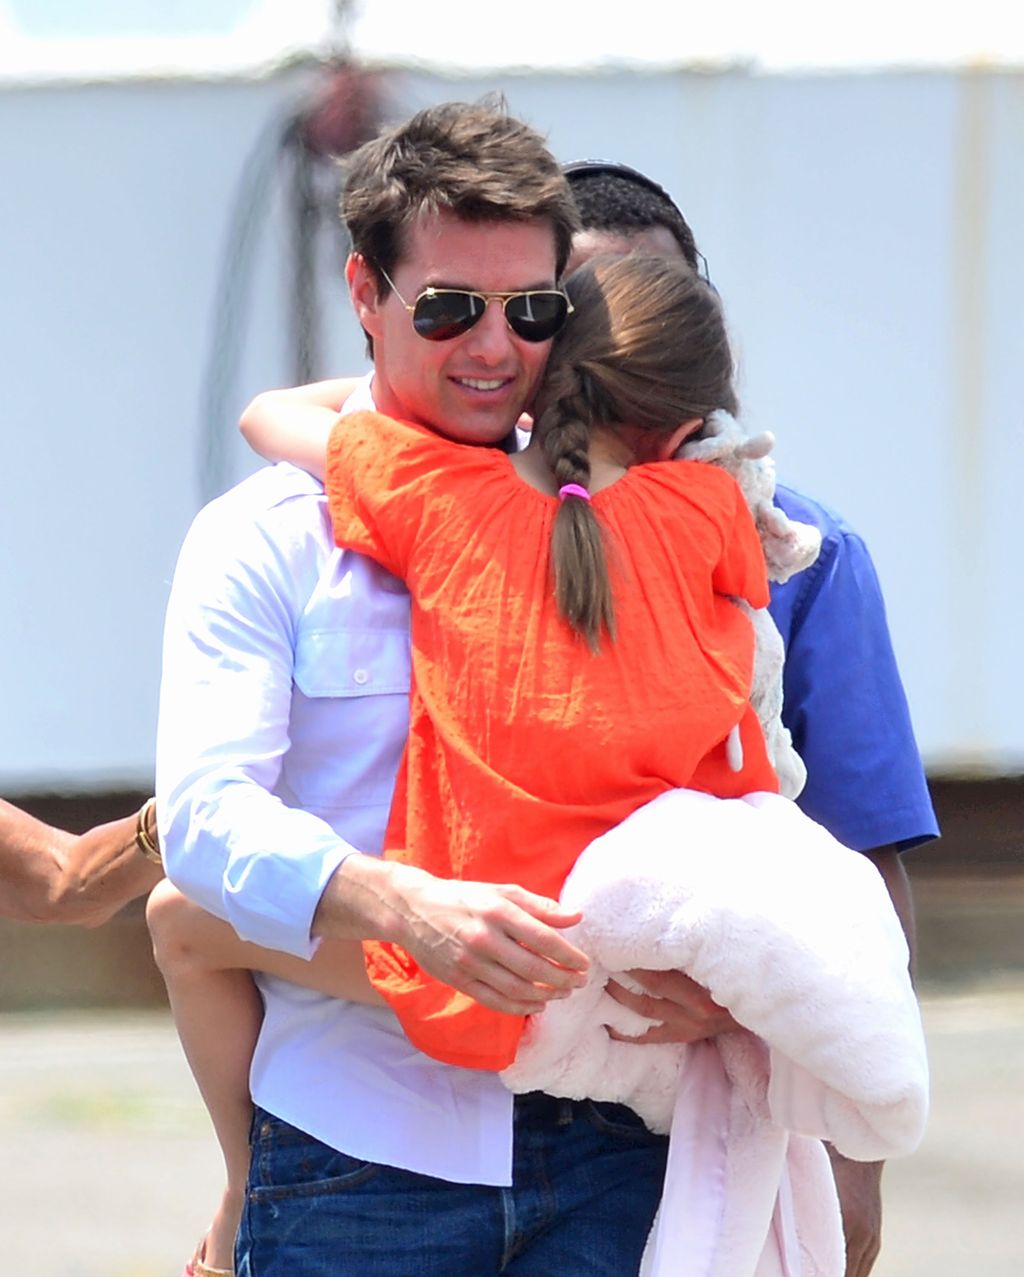 NEW YORK, NY - JULY 18:  Tom Cruise and Suri Cruise leave Manhattan by helicopter at the West Side Heliport on July 18, 2012 in New York City.  (Photo by James Devaney/WireImage)